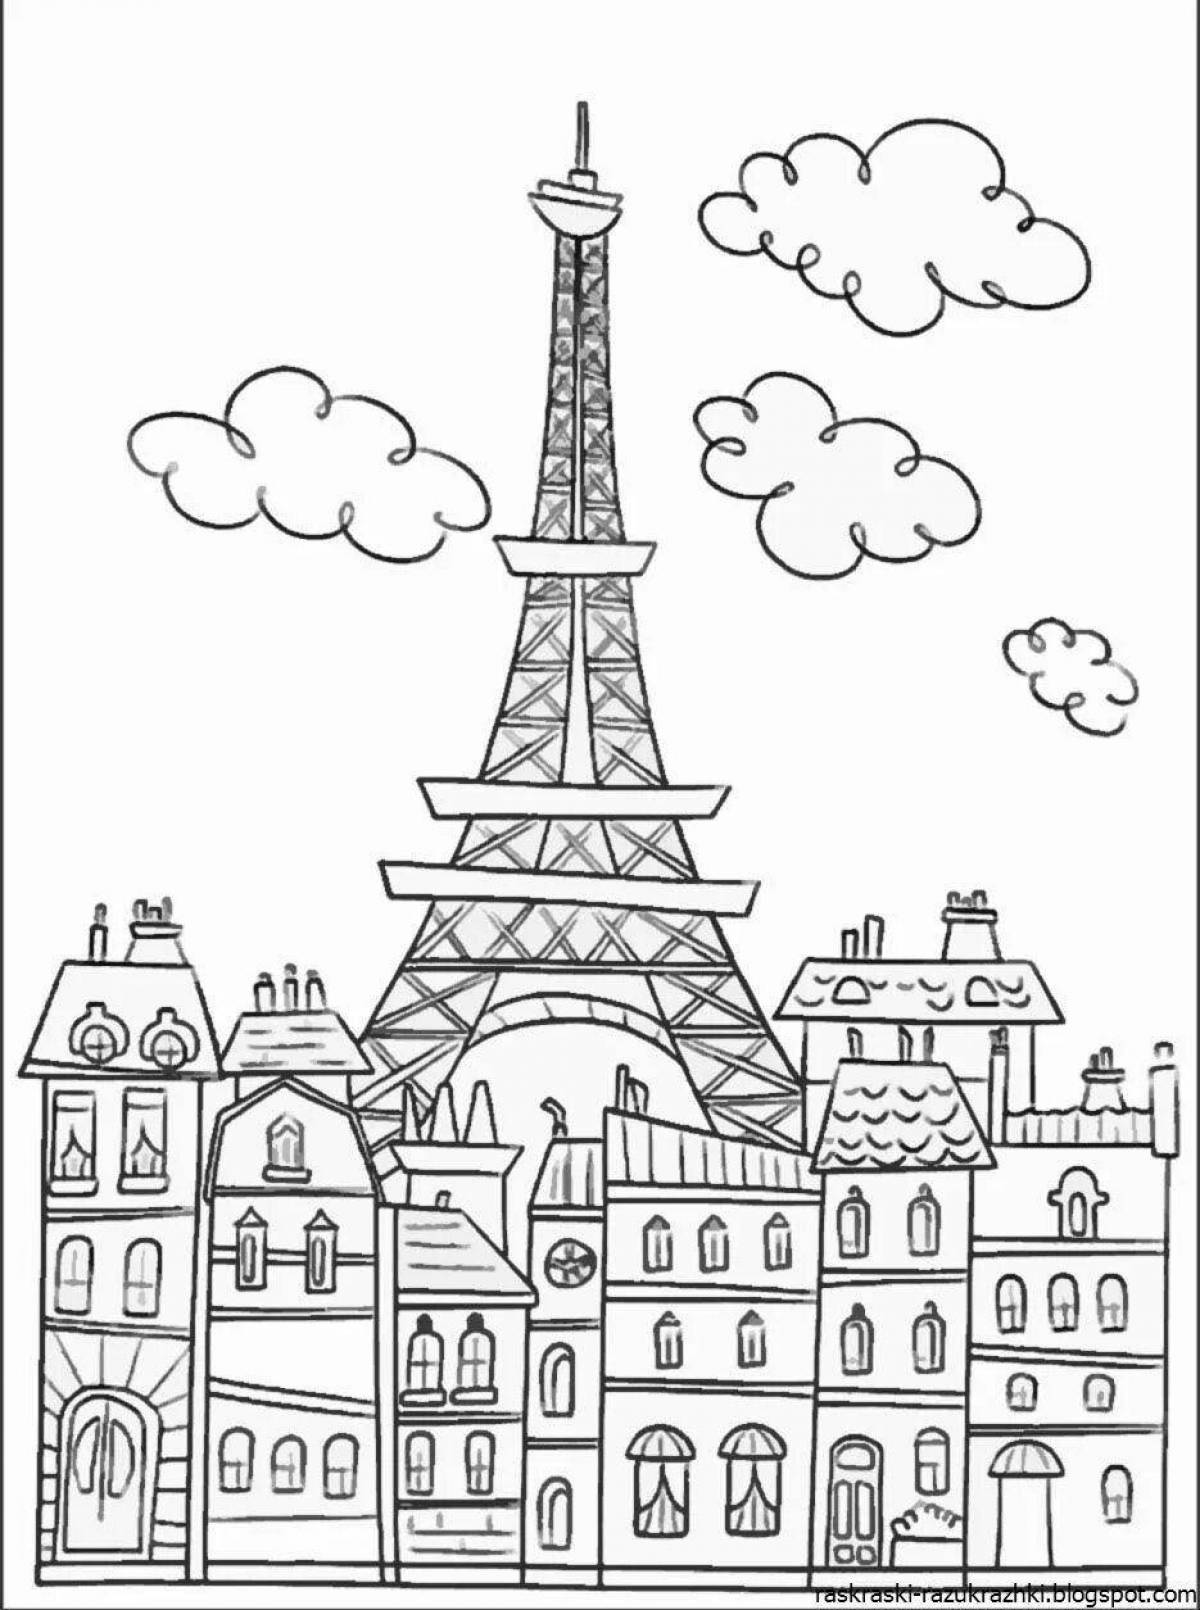 Fun tower coloring for kids